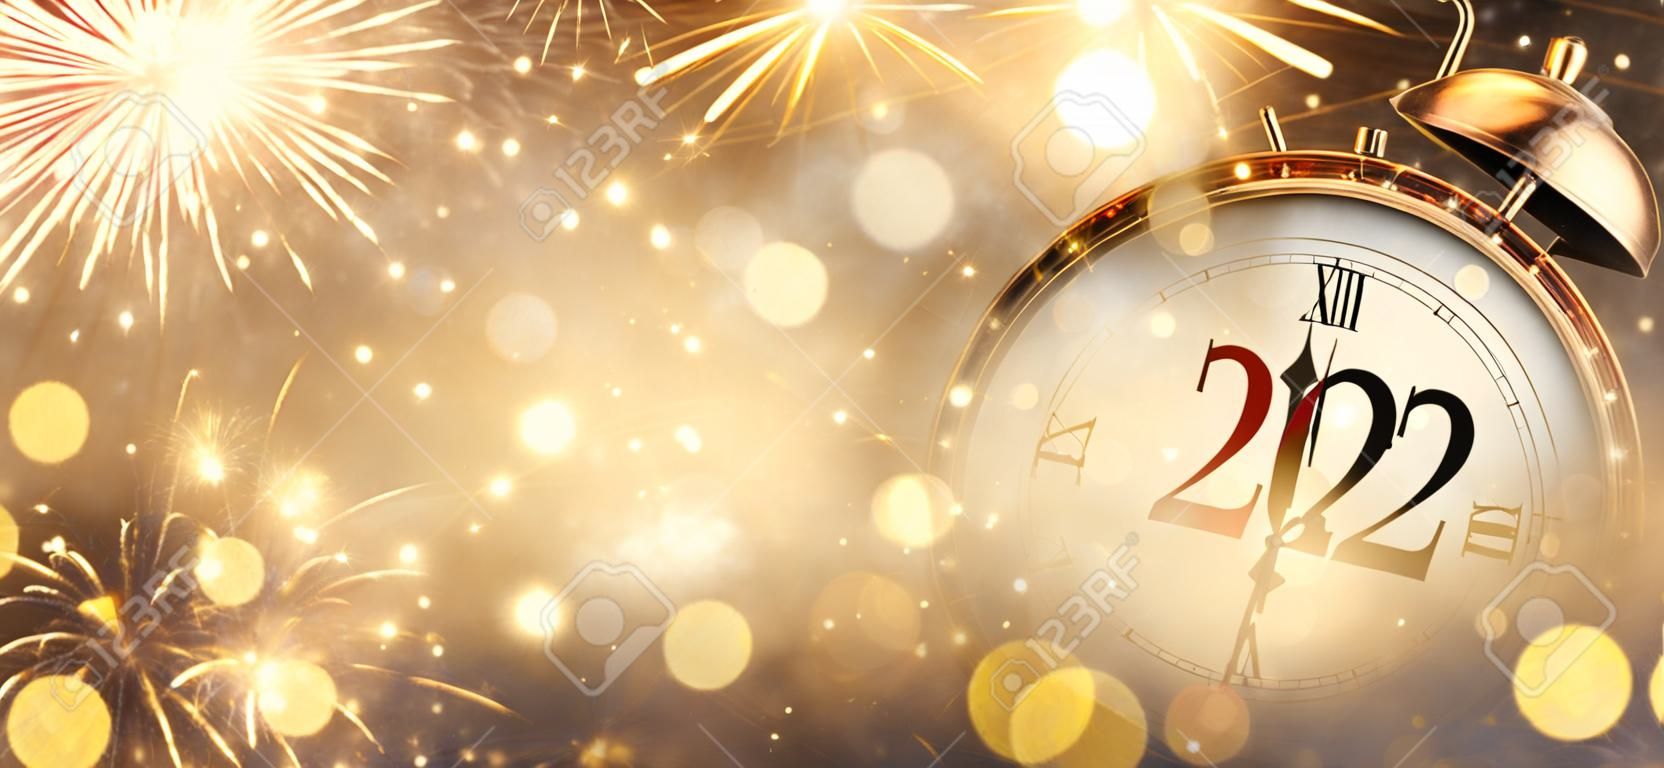 2022 New Year - Clock And Fireworks - Countdown To Midnight - Golden Abstract Defocused Background